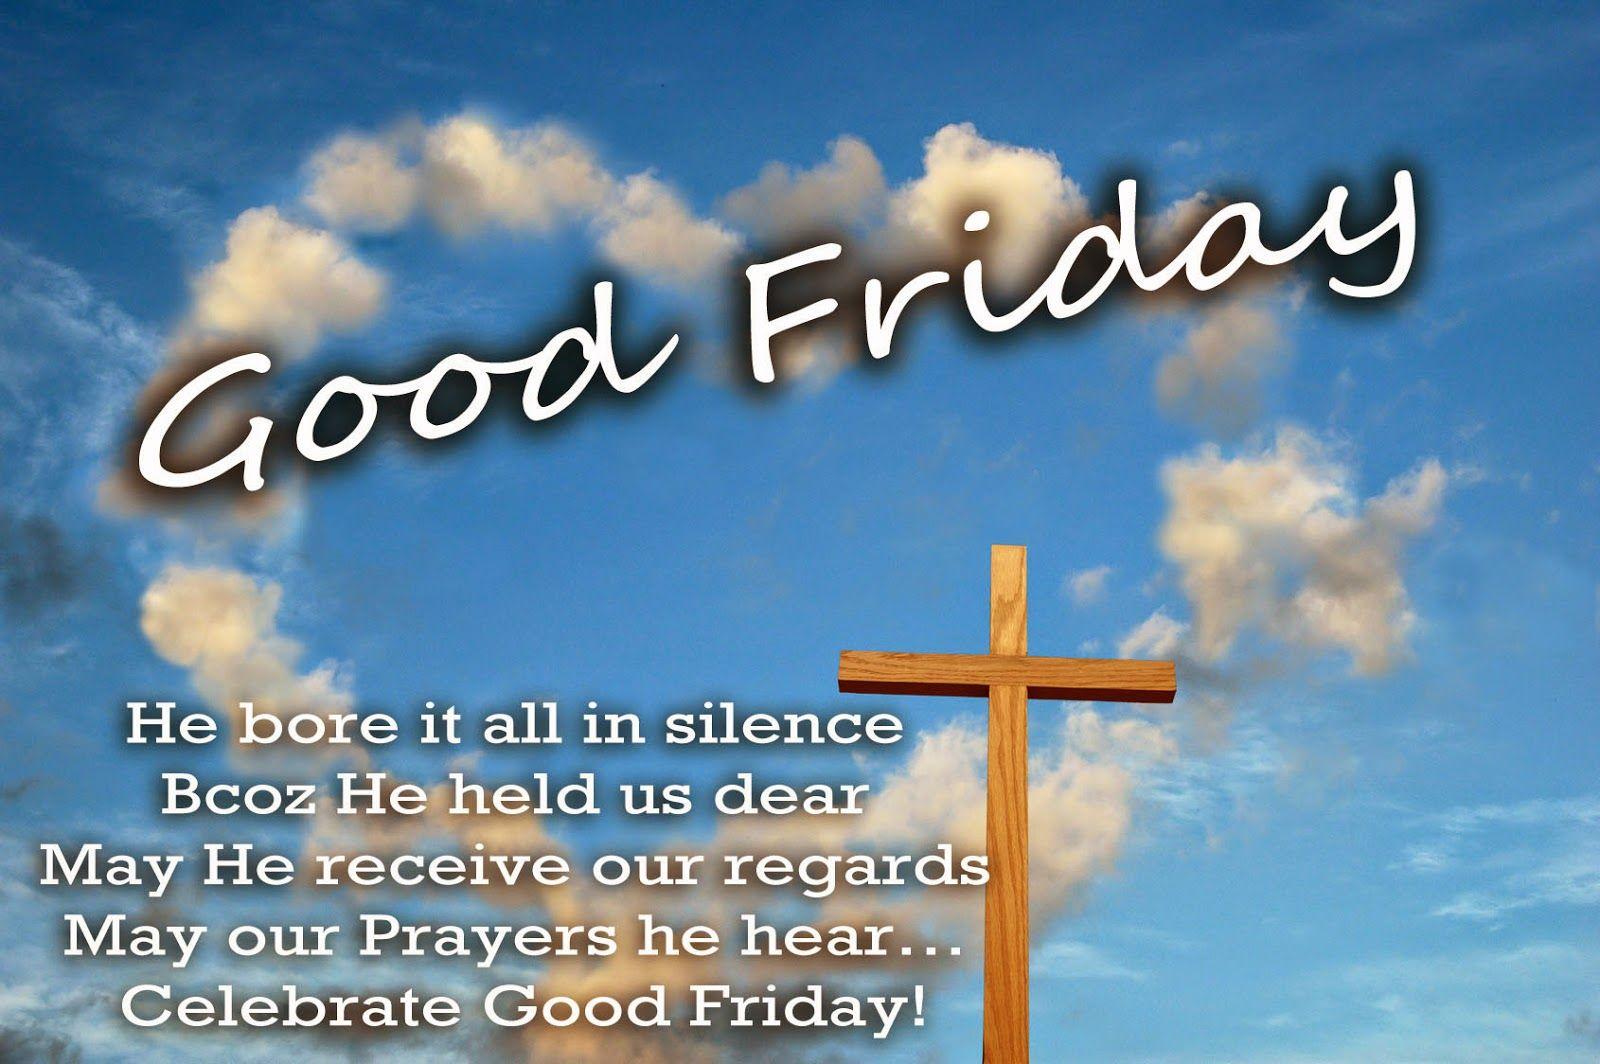 Blessed Good Friday Wallpaper 2017 With Quotes For Facebook